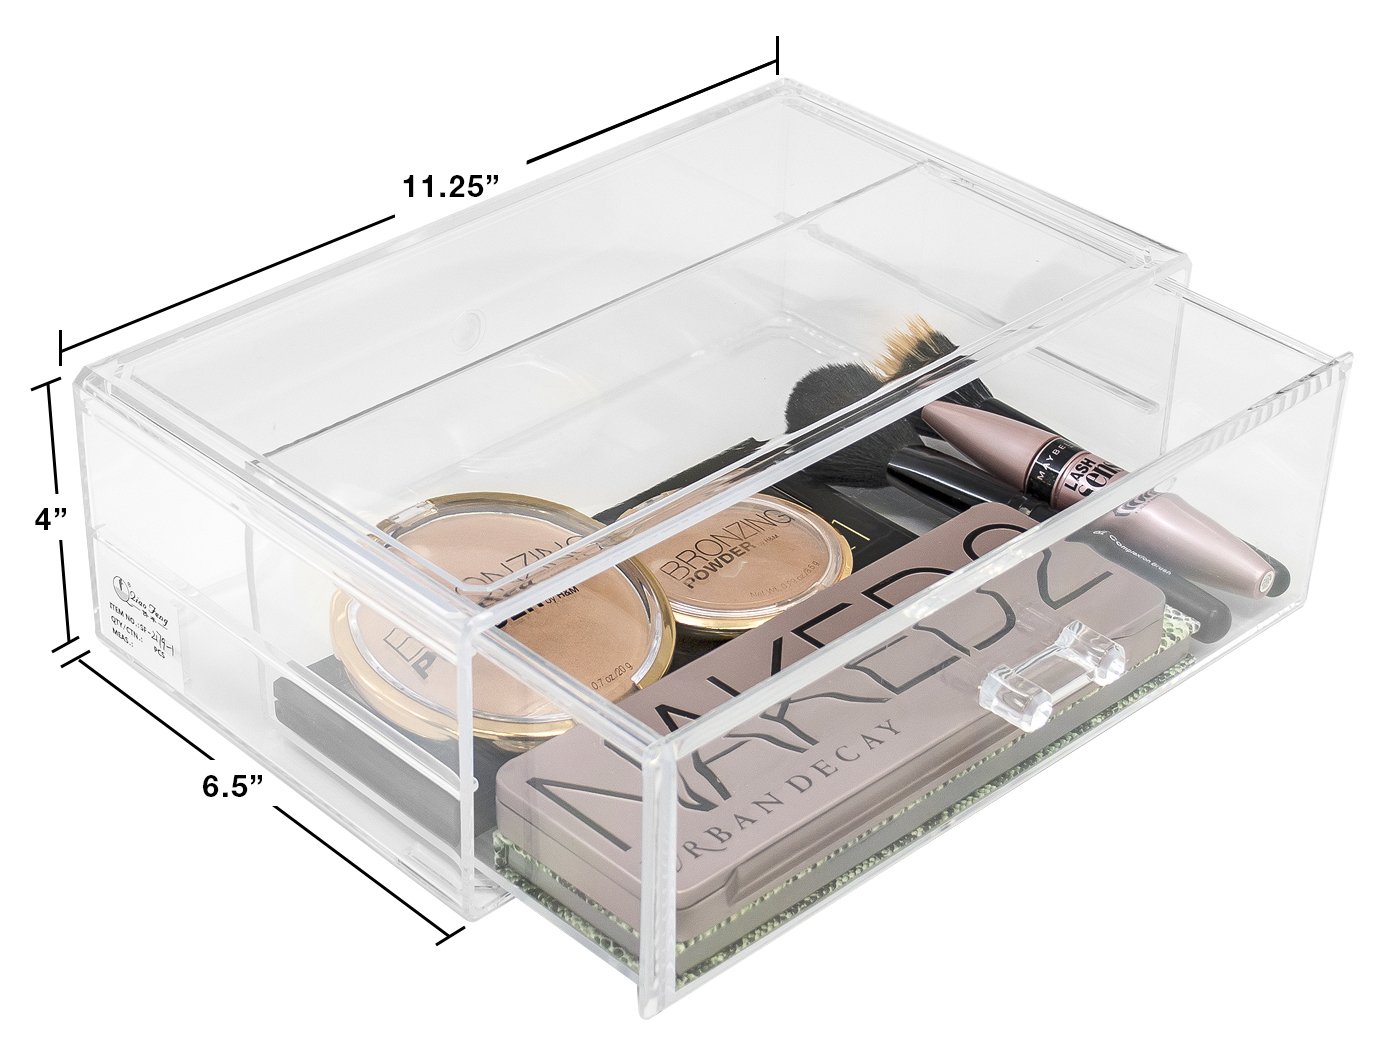 Sorbus Clear Acrylic Makeup Organizers - Stackable Jewelry, Makeup & Cosmetic Organizers and Storage with Acrylic Drawers - Great Bathroom Organizer & Display Set for Vanity, Dresser & Countertop